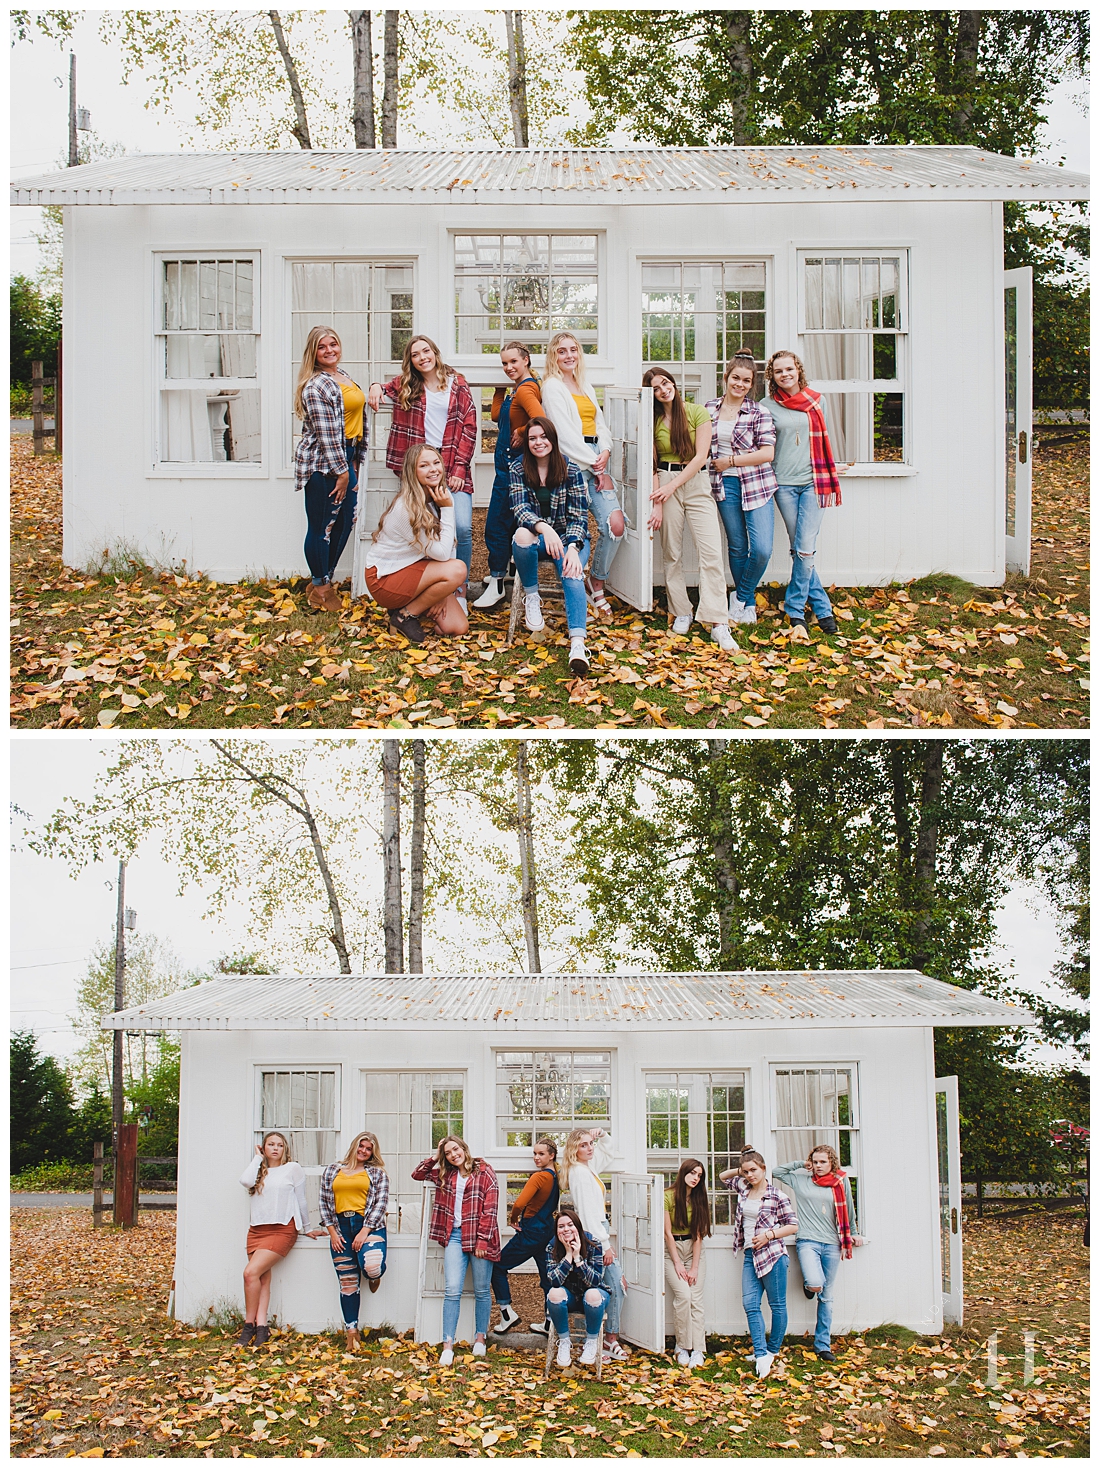 AHP Model Team Fall Portraits in Front of a White Studio at Wild Hearts Farm | Group Portraits by Amanda Howse